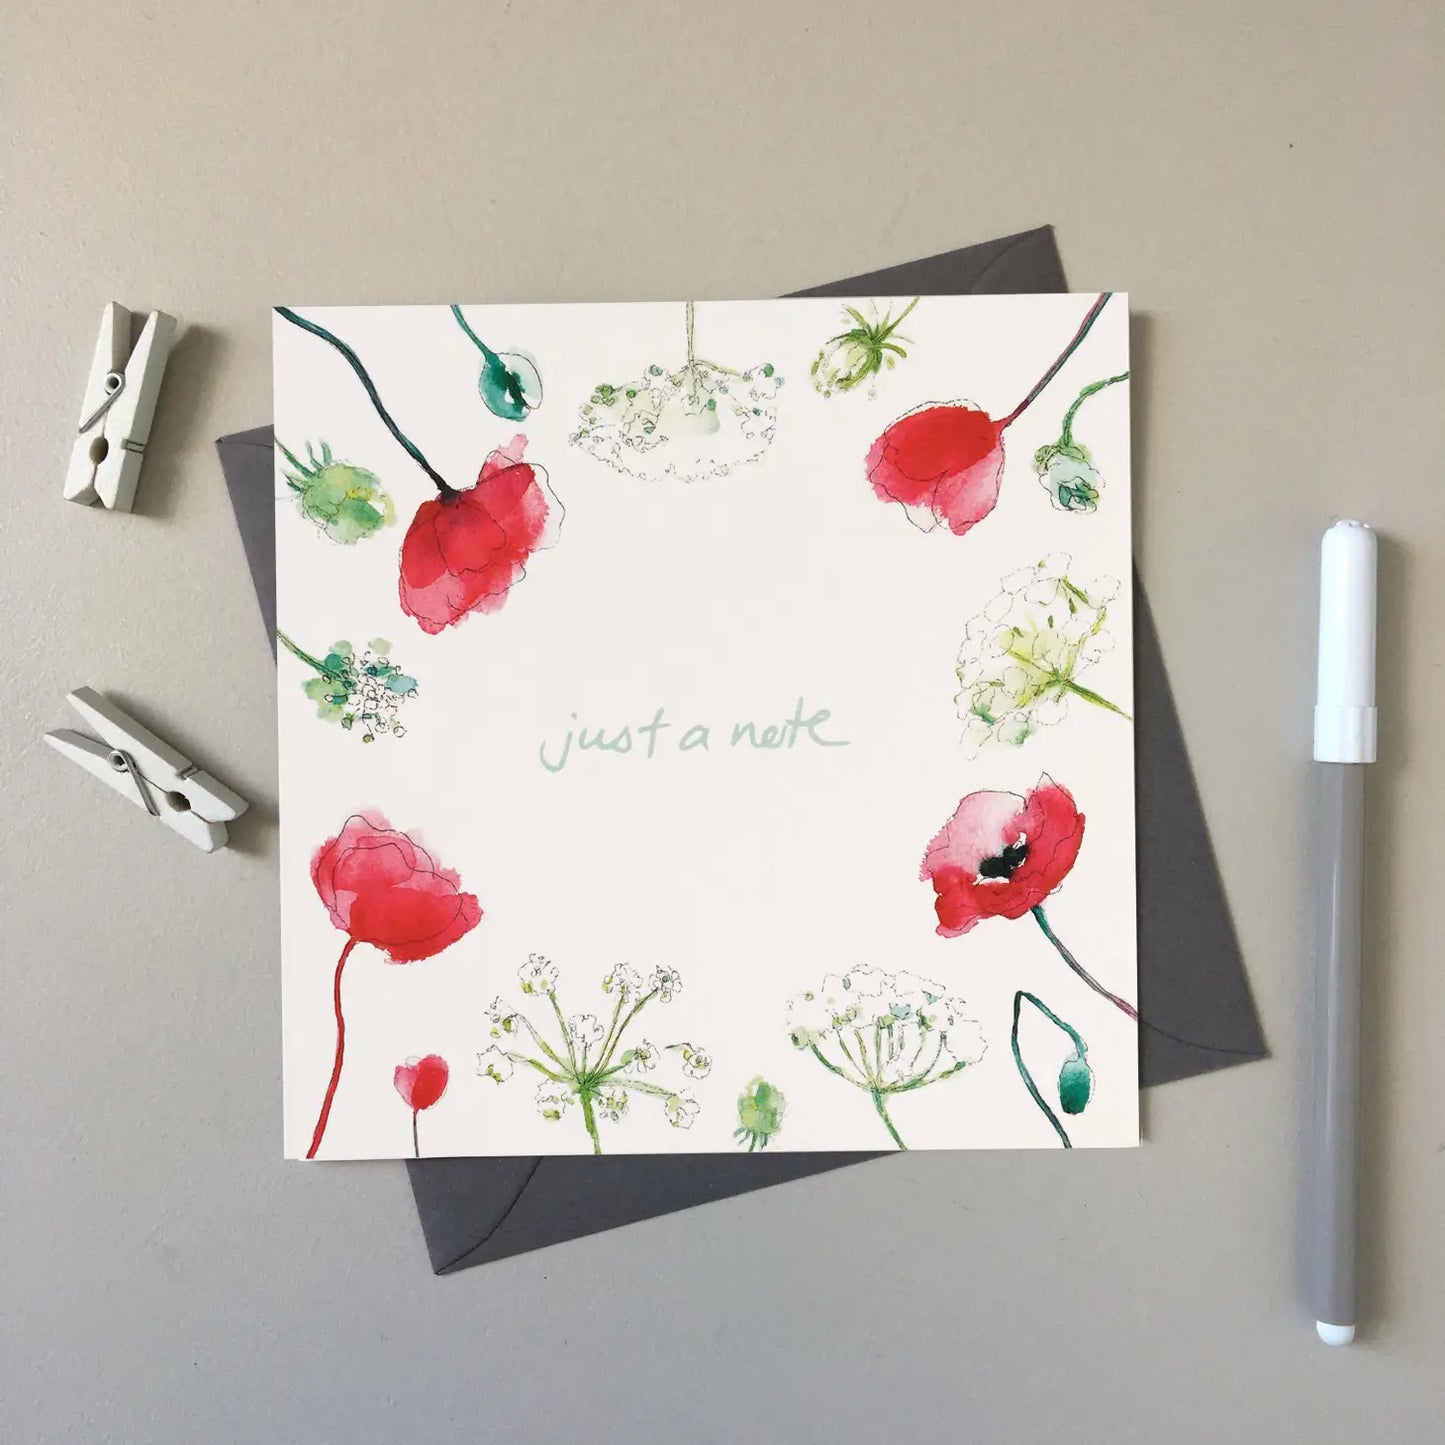 Just a note greeting card is surround by poppies and other sweet flowers.